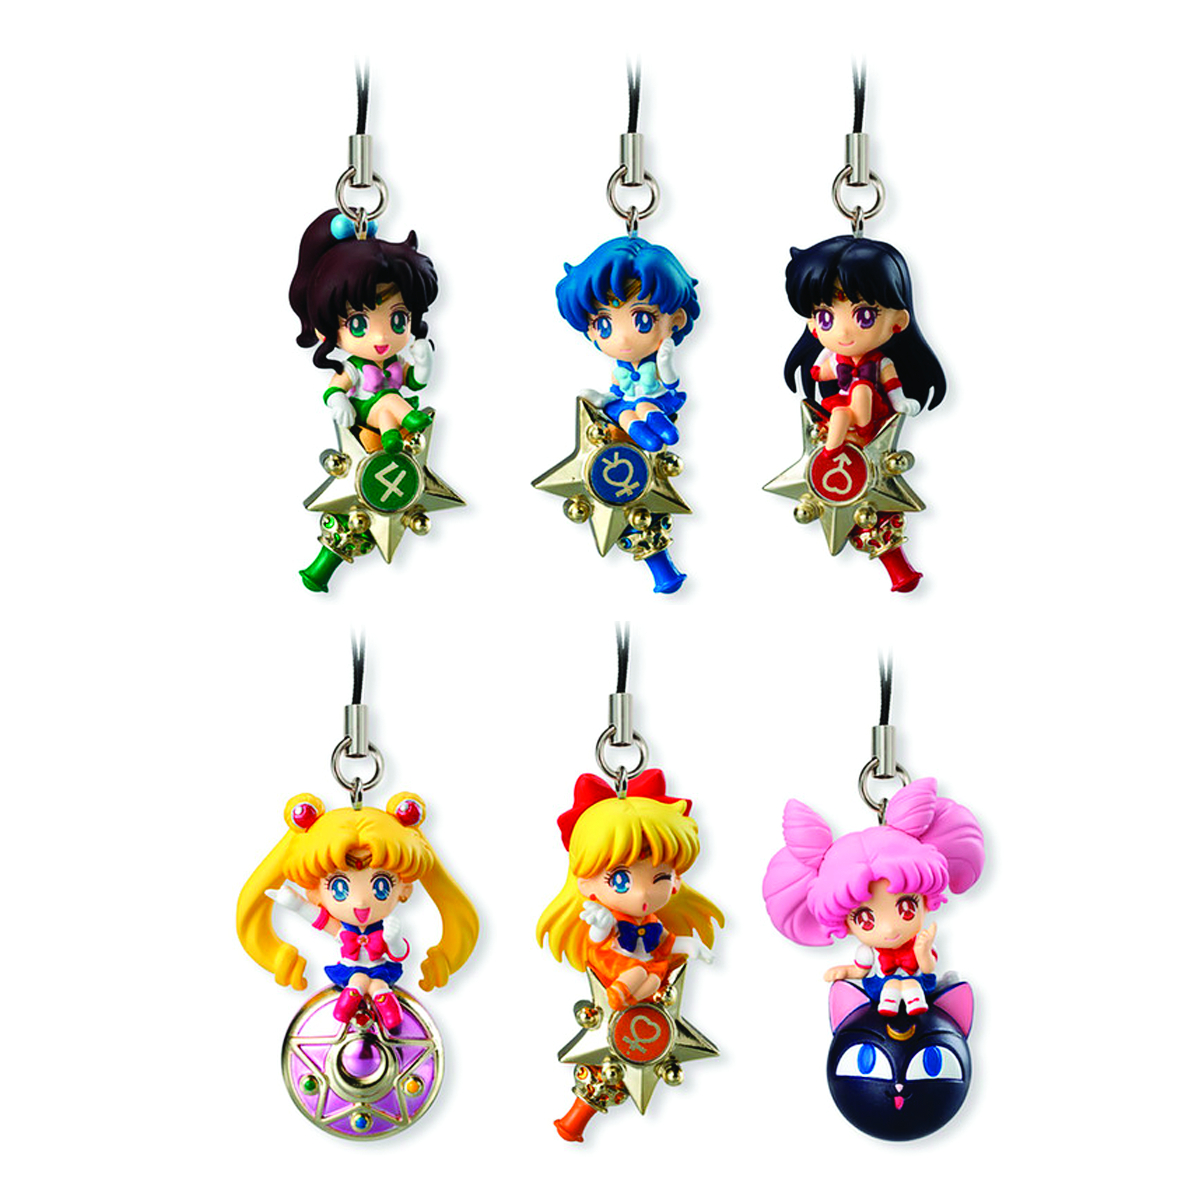 Sailor Moon Twinkle Dolly Volume 1 Mercury Charm NEW Toys Collectibles